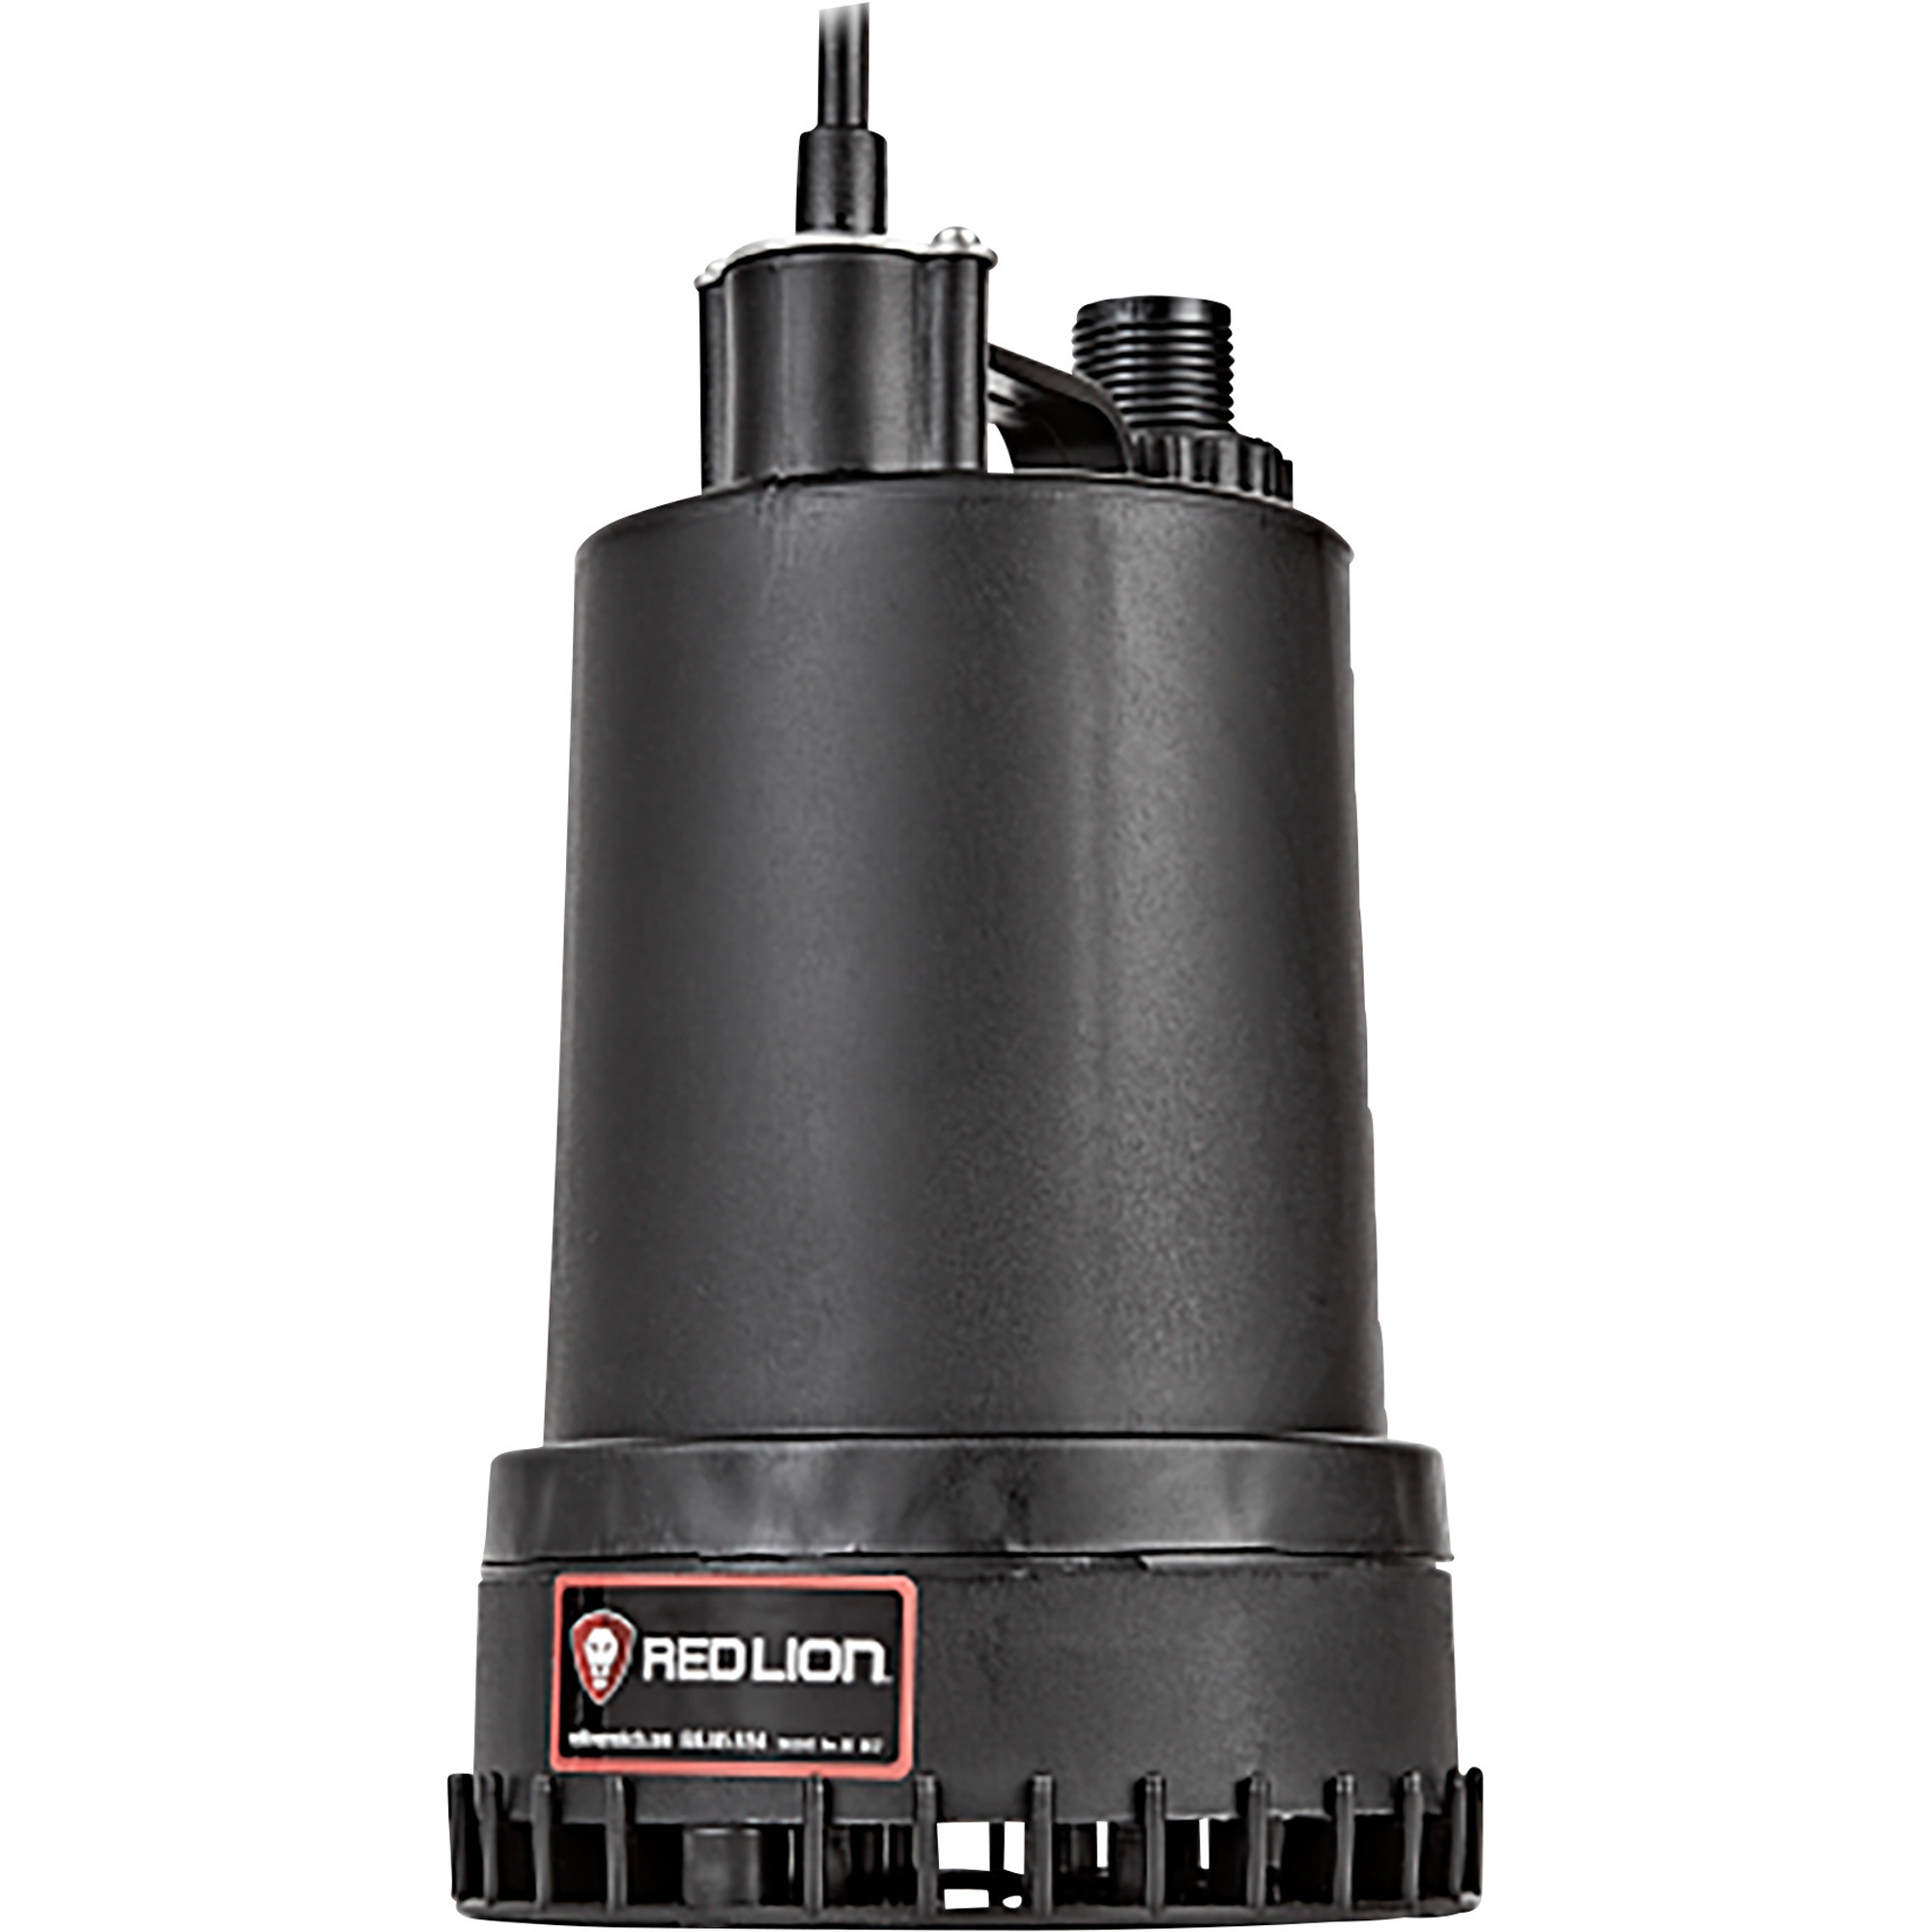 Red Lion Submersible Utility Water Pump â 1,300 GPH, 1/6 HP, 1n. MNPT/3/4Inch GHT Ports, Model RL-MP16